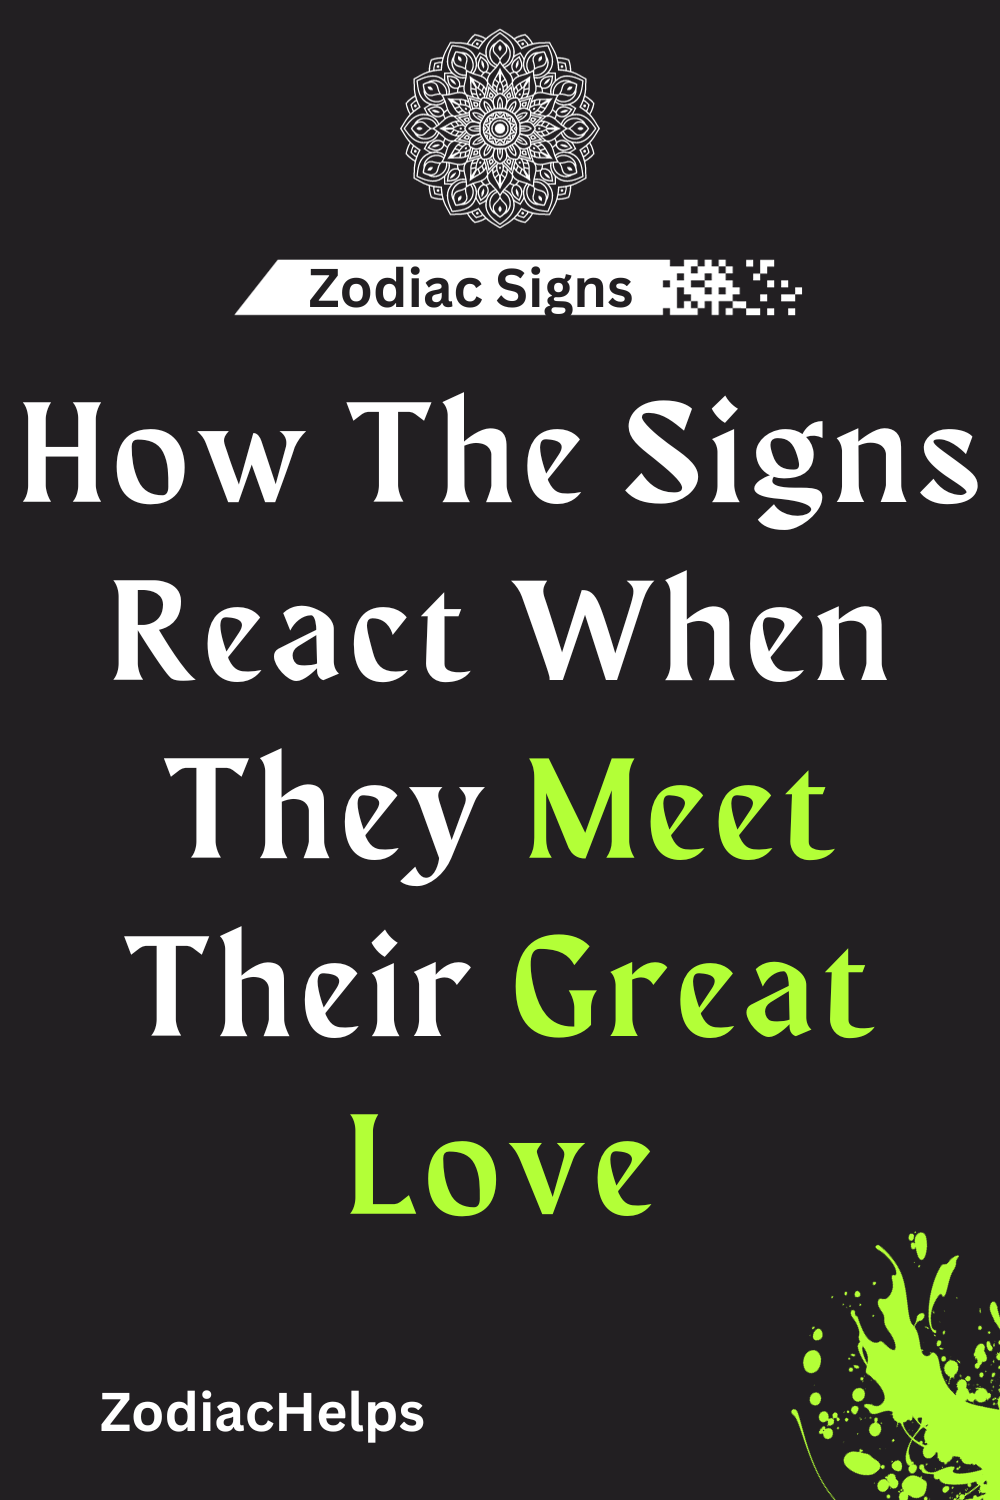 How The Signs React When They Meet Their Great Love